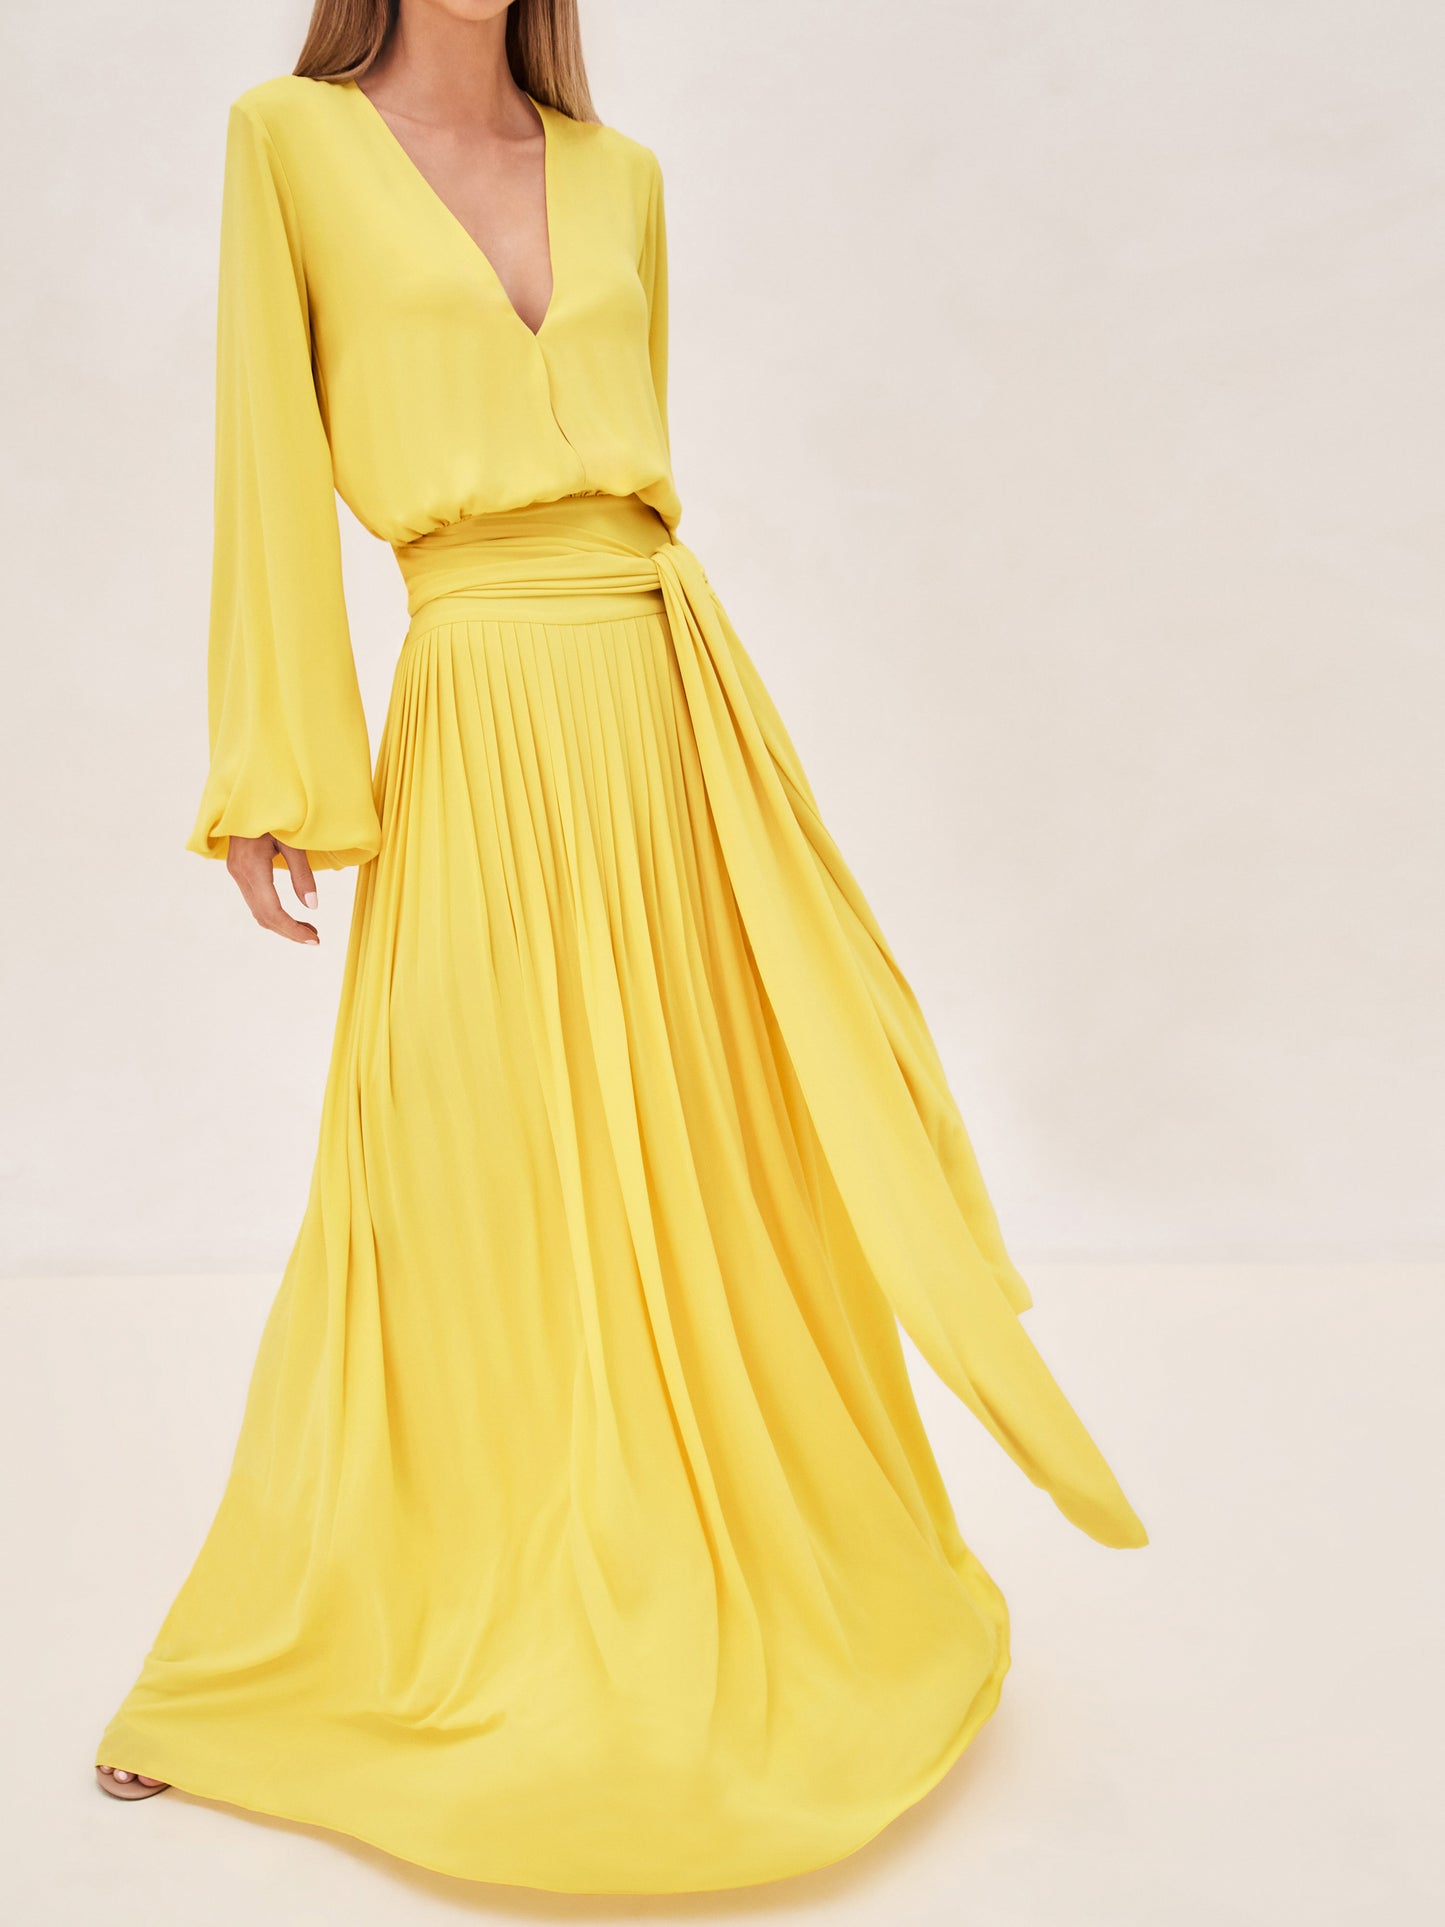 ALEXIS Diane long sleeve Dress in yellow. hover image